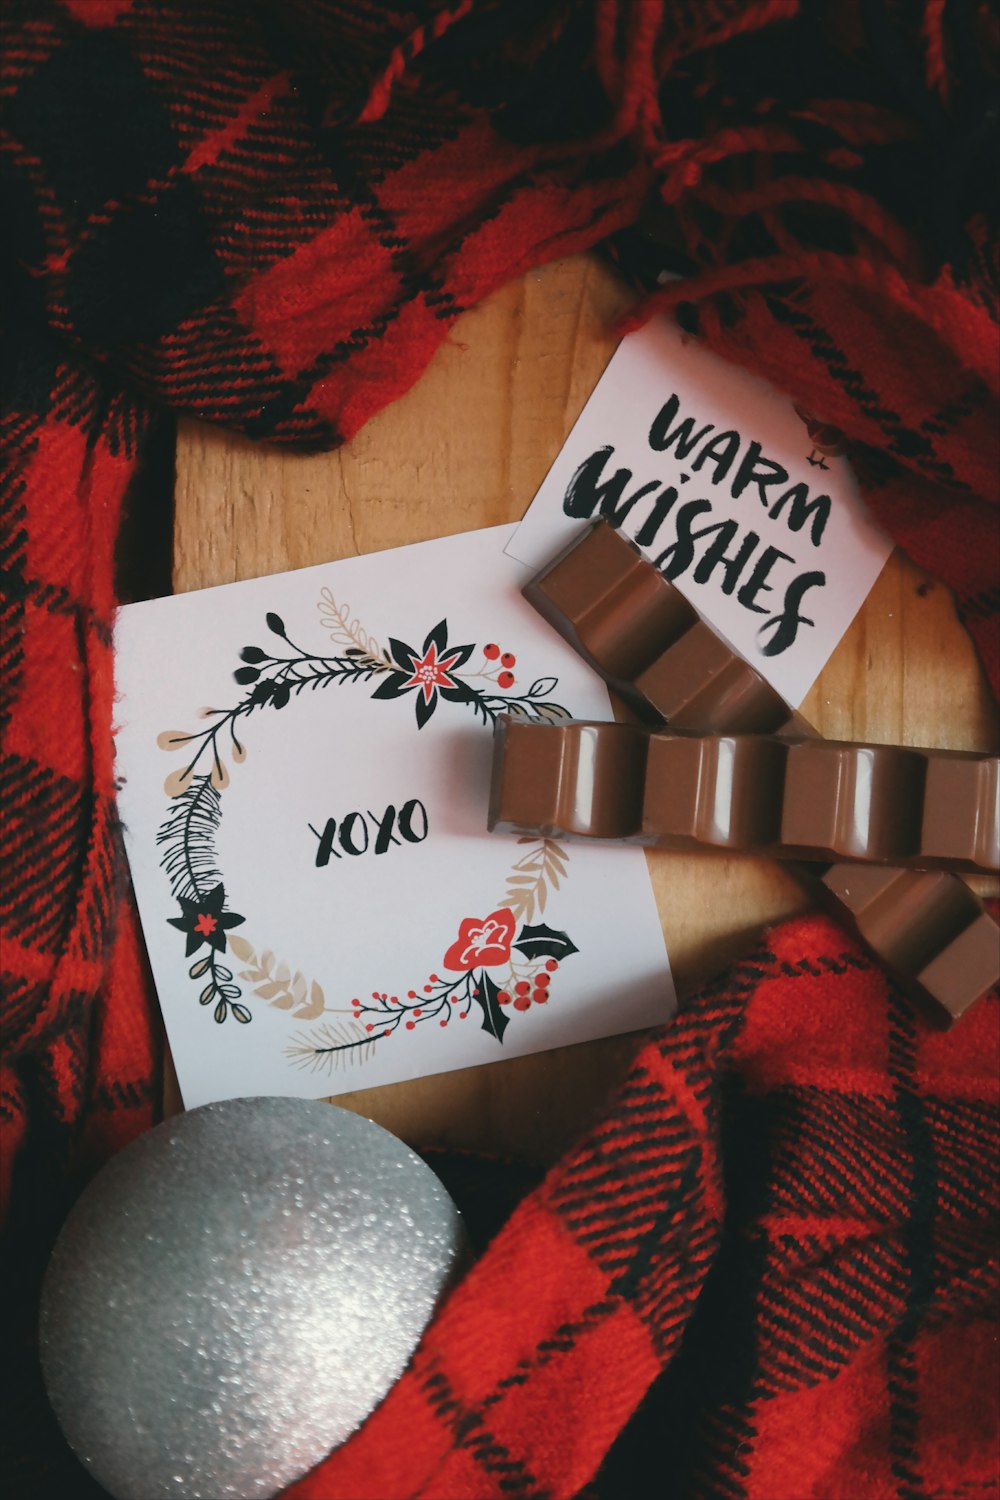 An XOXO note next to a gray Christmas ornament and red plaid fabric.